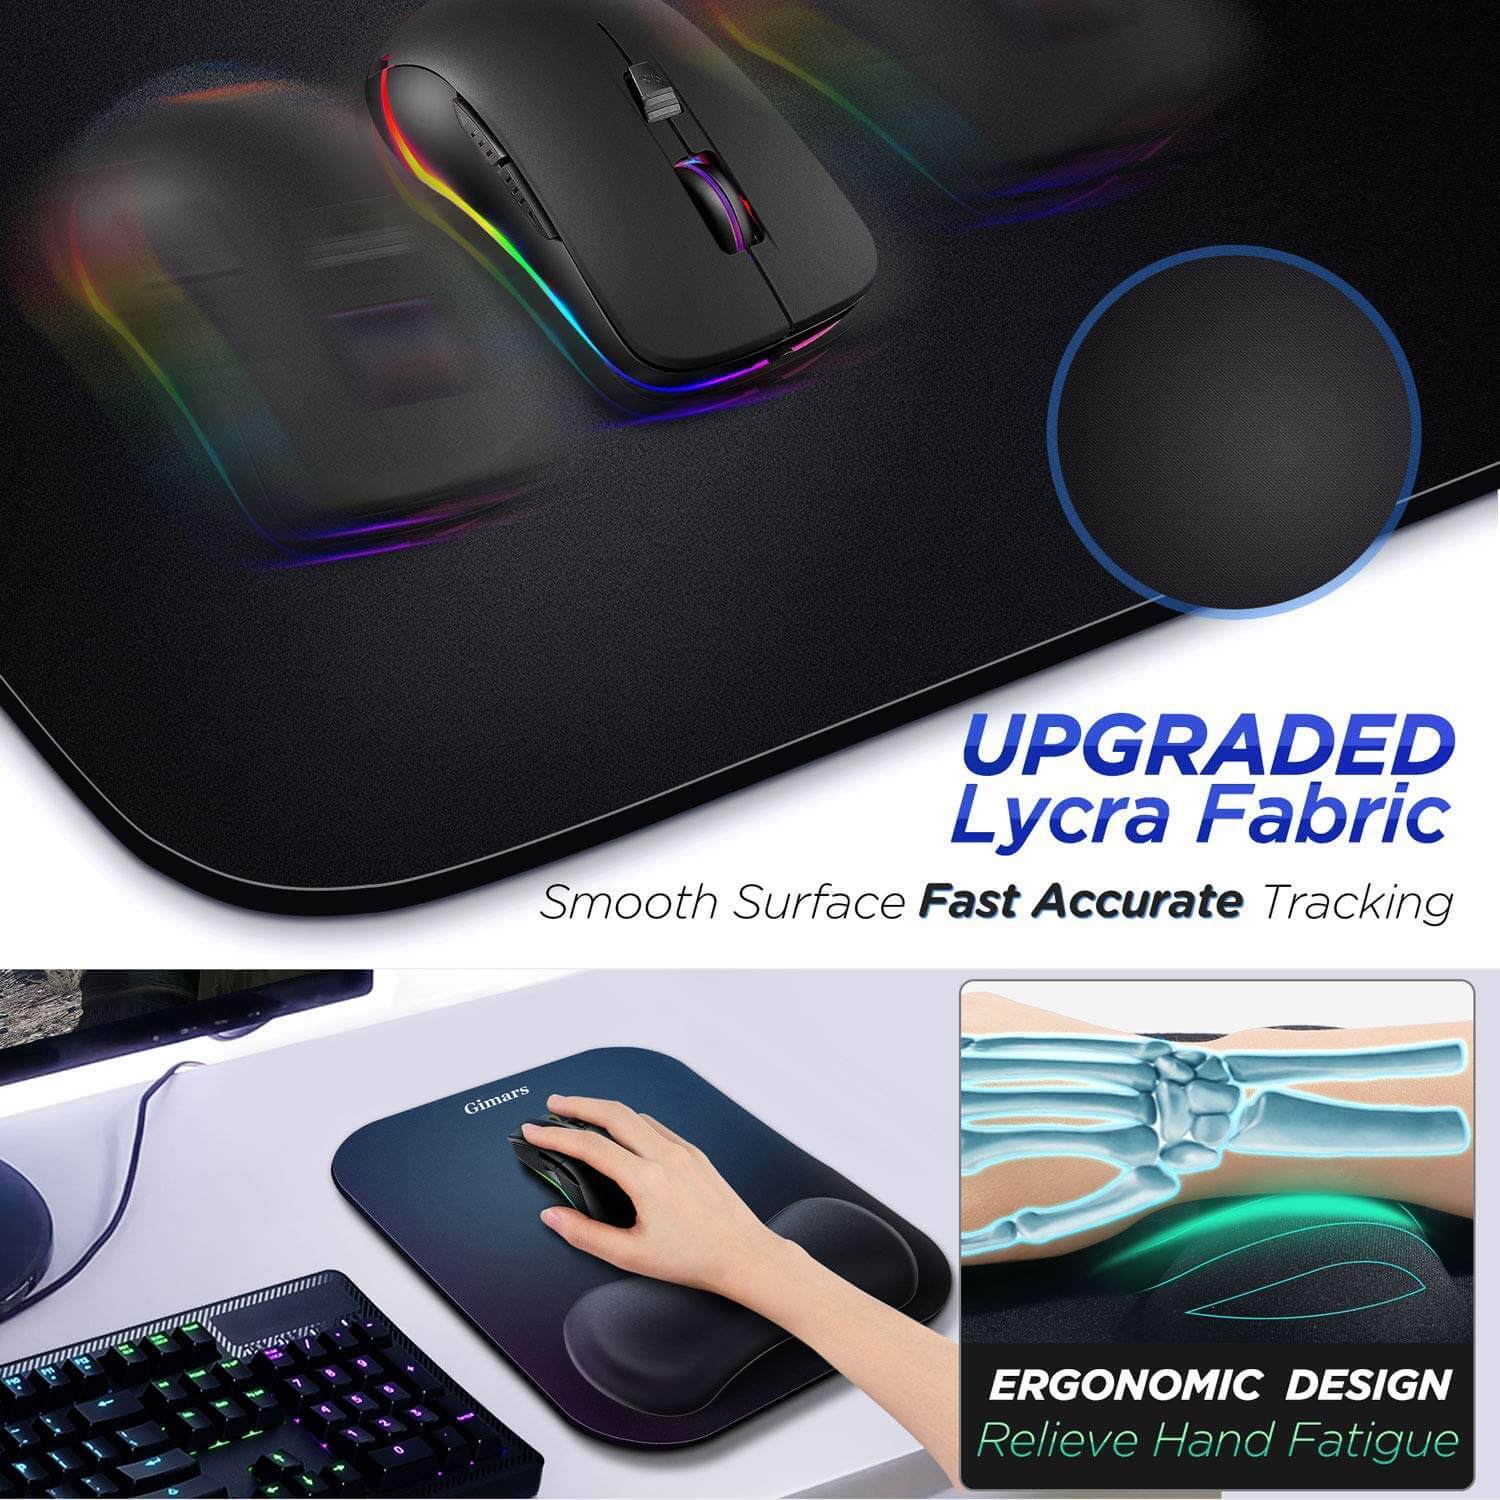 Smooth surface on this mouse pad rest